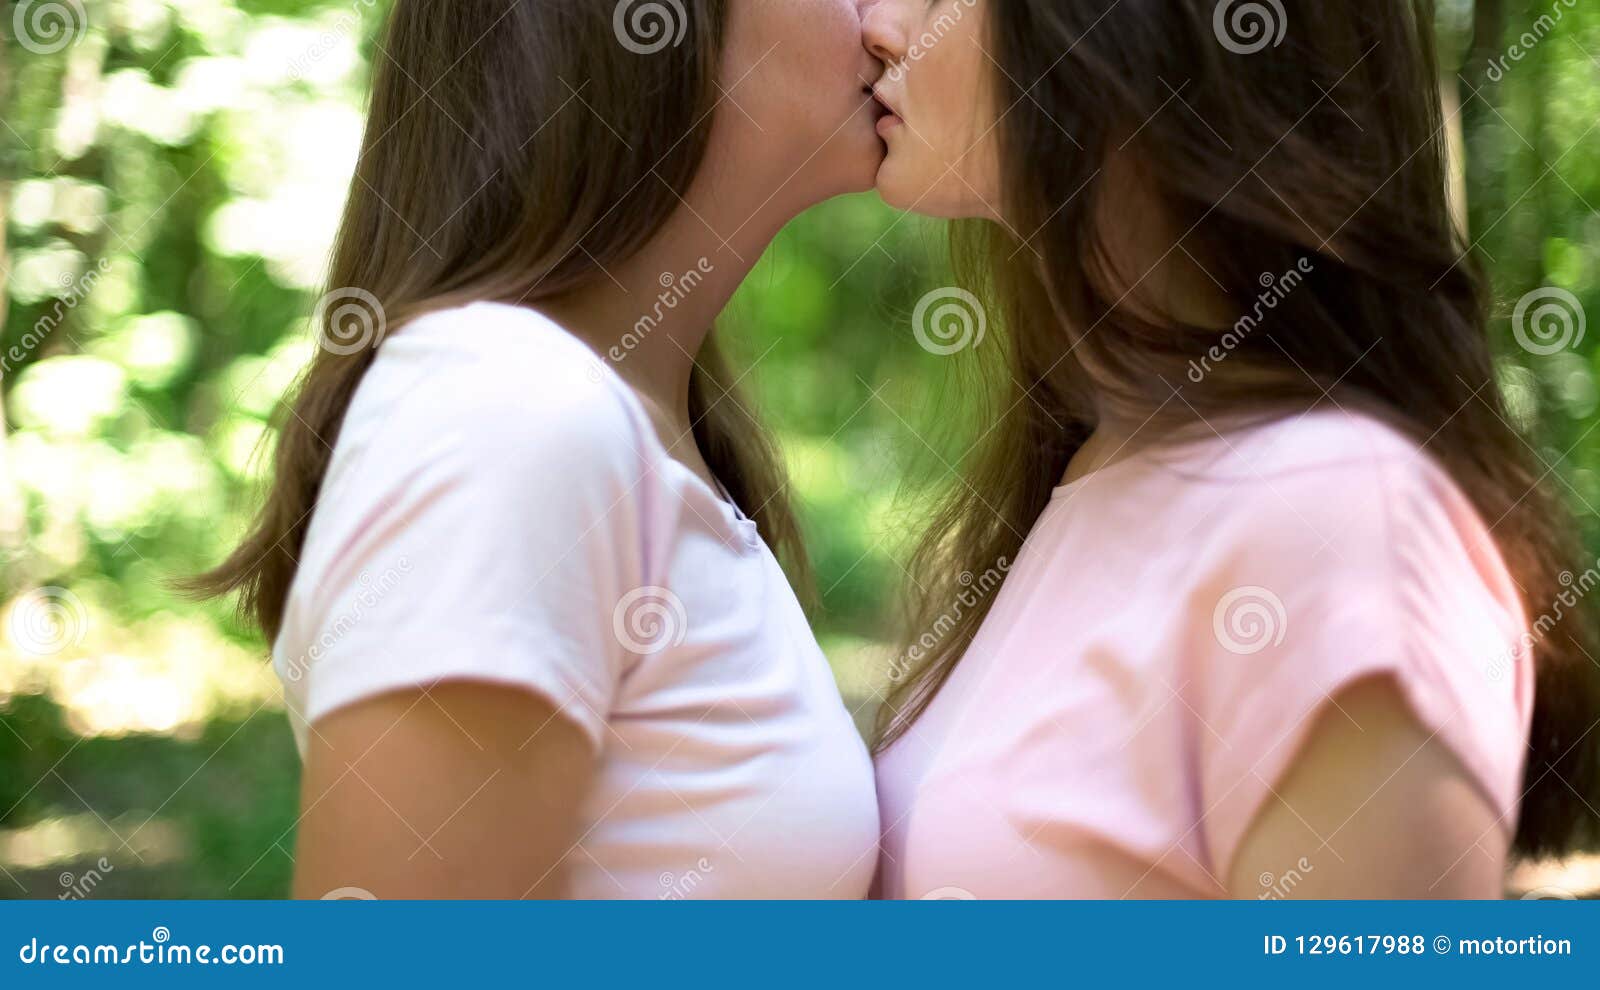 ajay dharamshi recommends 2 lesbians making out pic